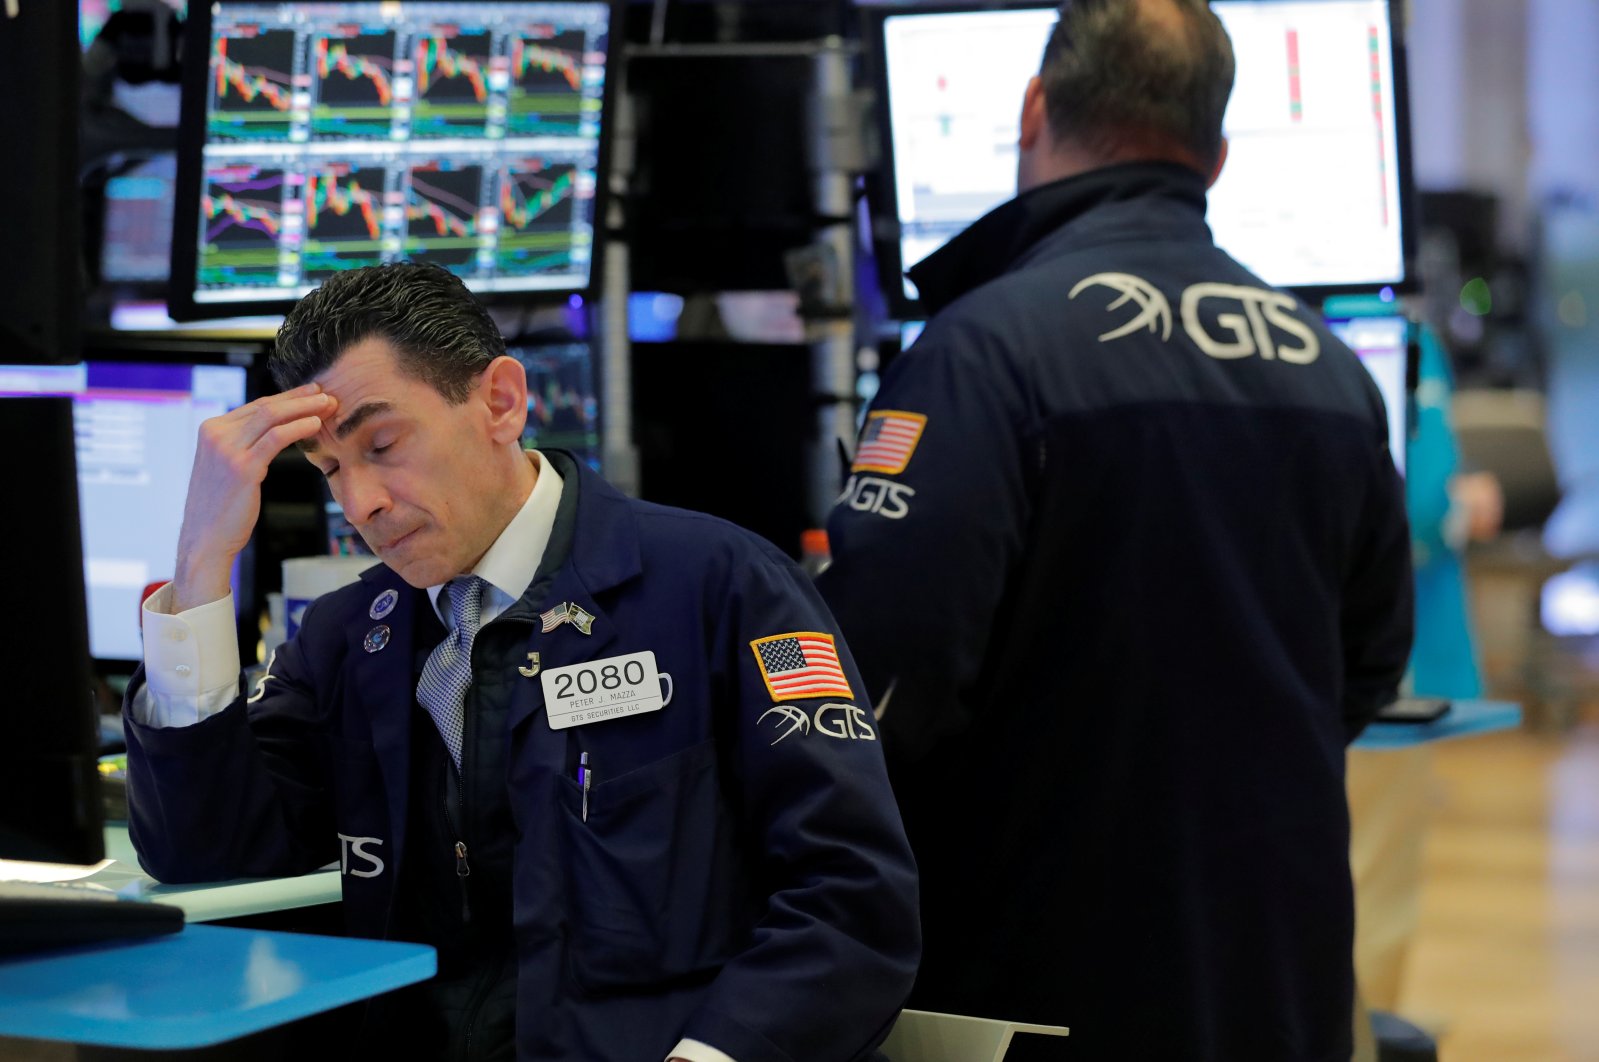 Traders work on the floor of the New York Stock Exchange (NYSE) as the building prepares to close indefinitely due to the COVID-19 outbreak in New York, U.S., Friday, March 20, 2020. (Reuters Photo)